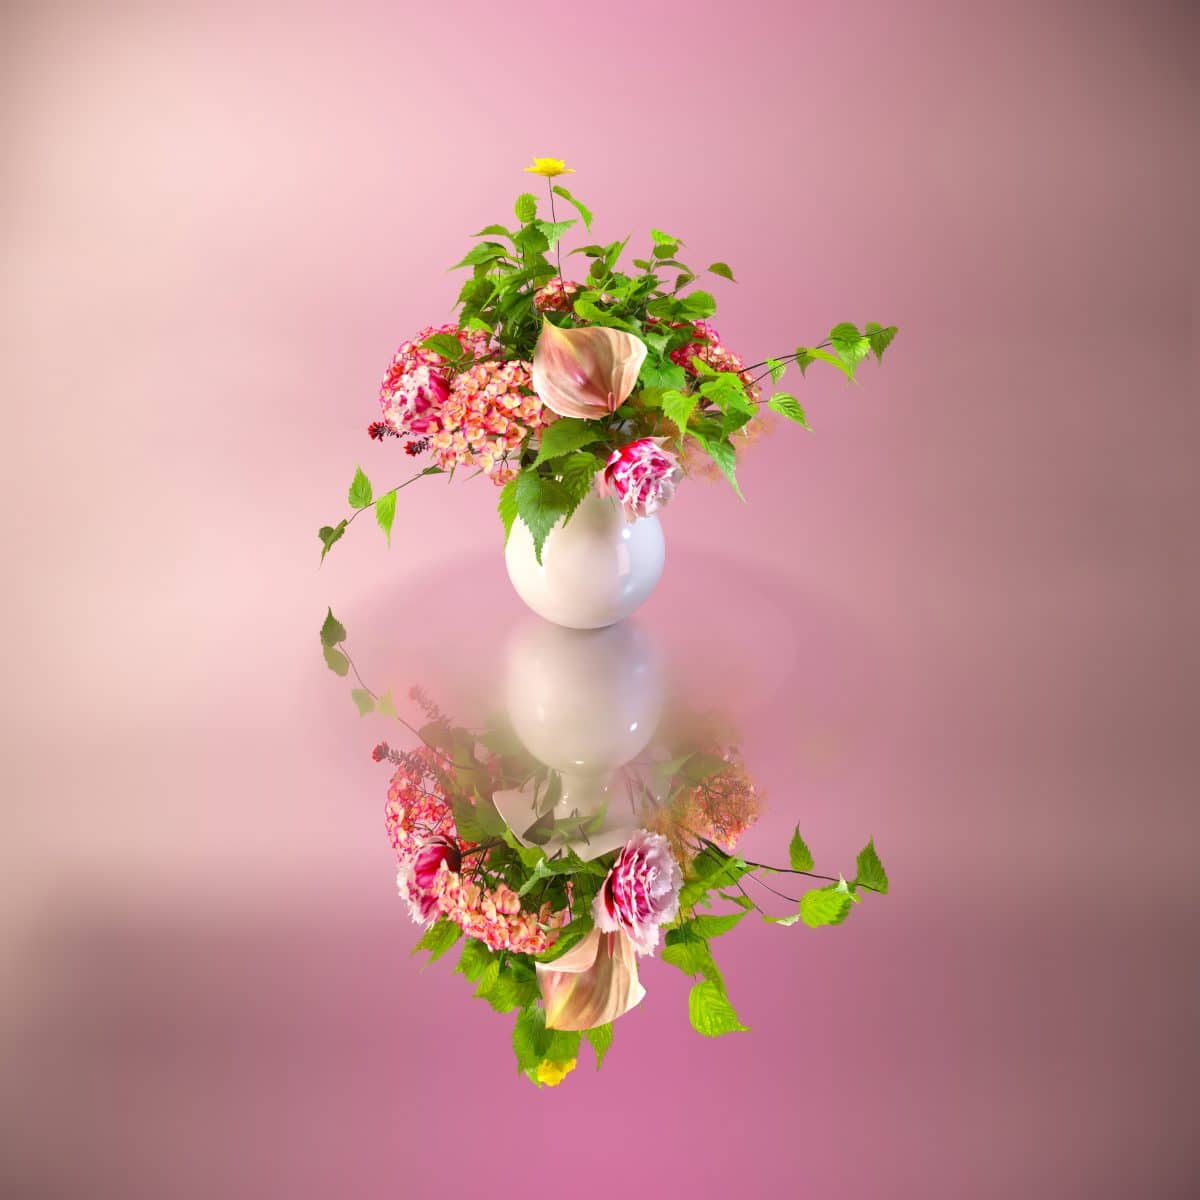 3d digital image of a bouquet of flowers